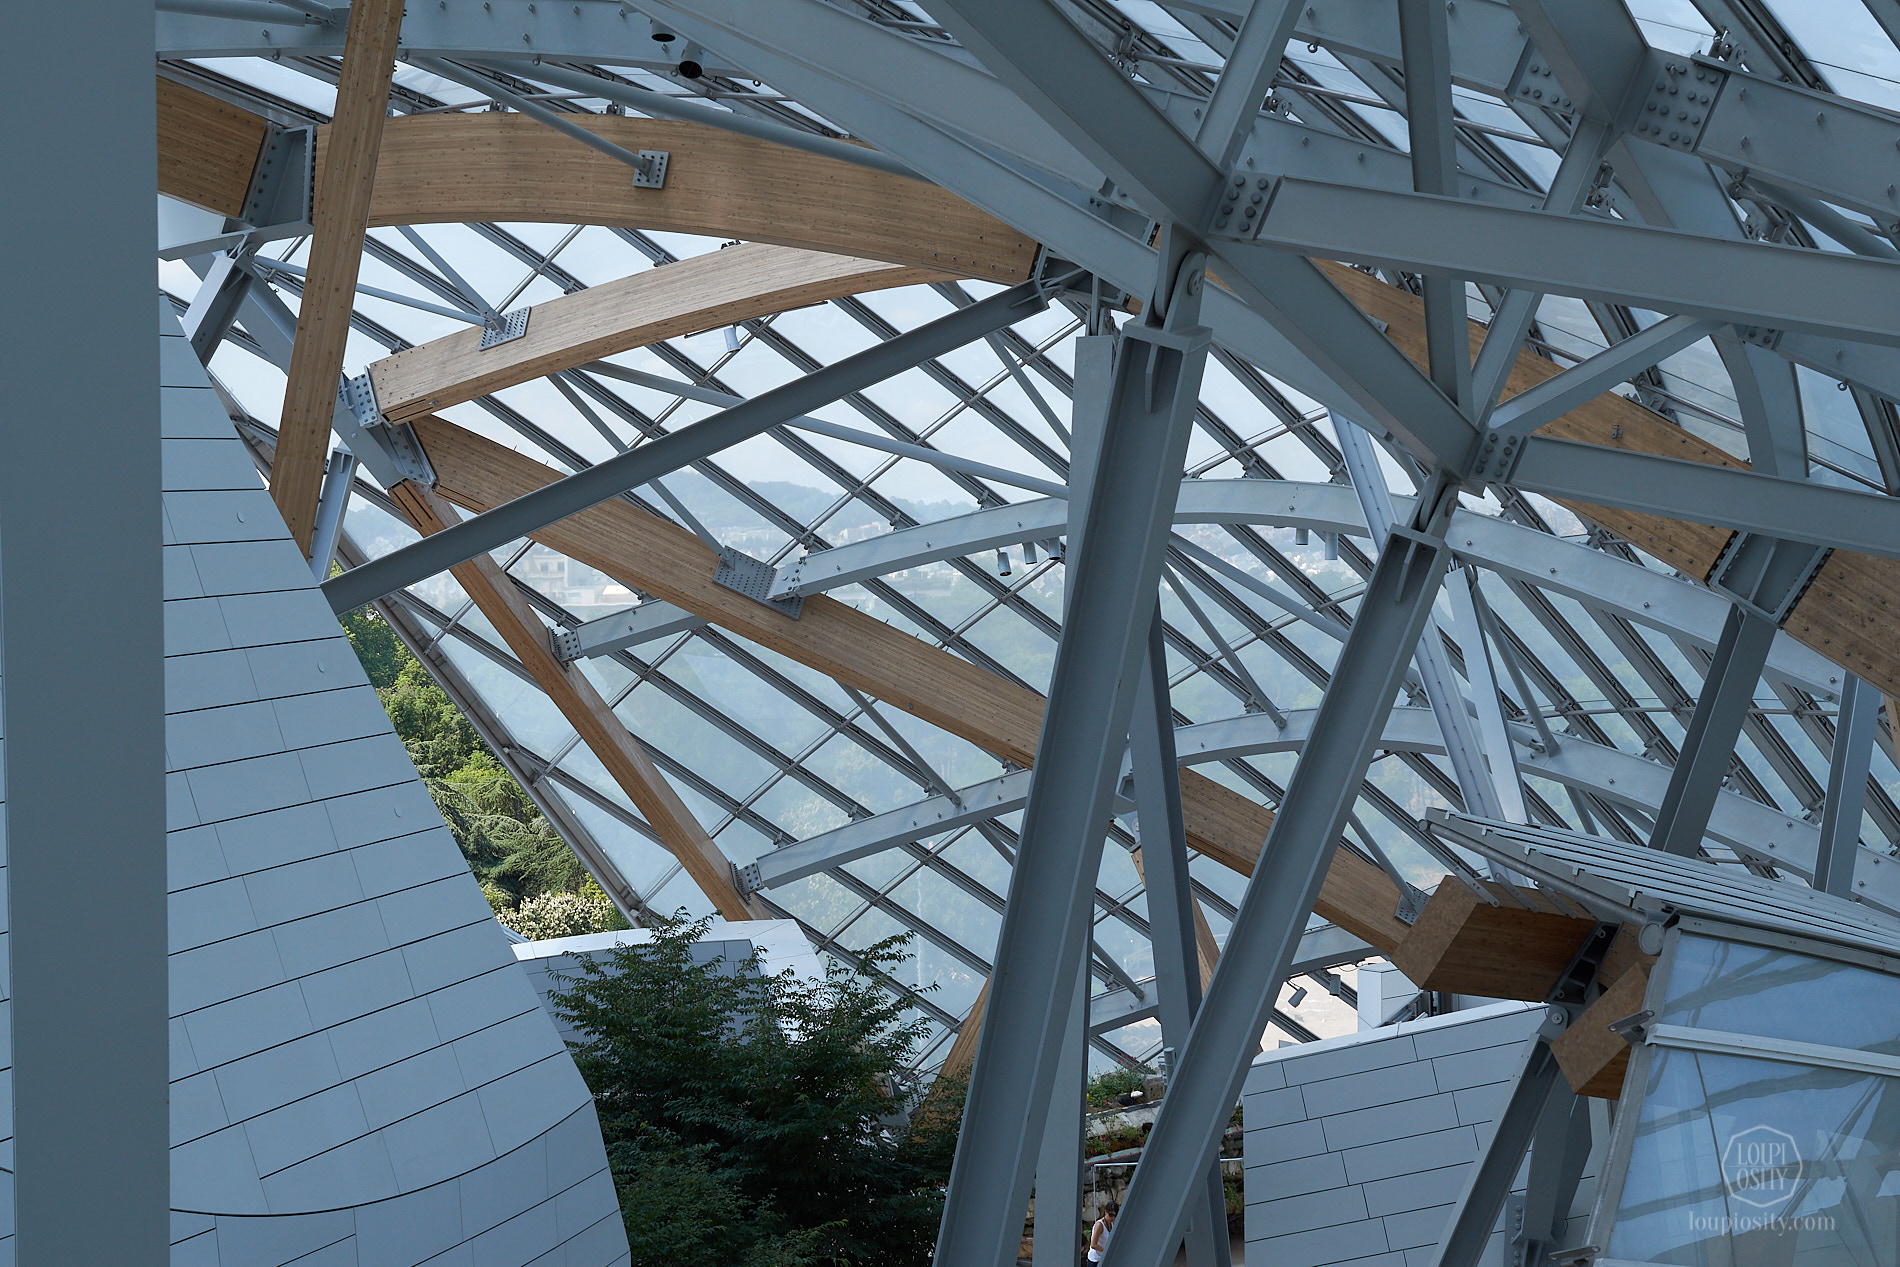 Foundation Louis Vuitton - The French Connections - CycleBlaze